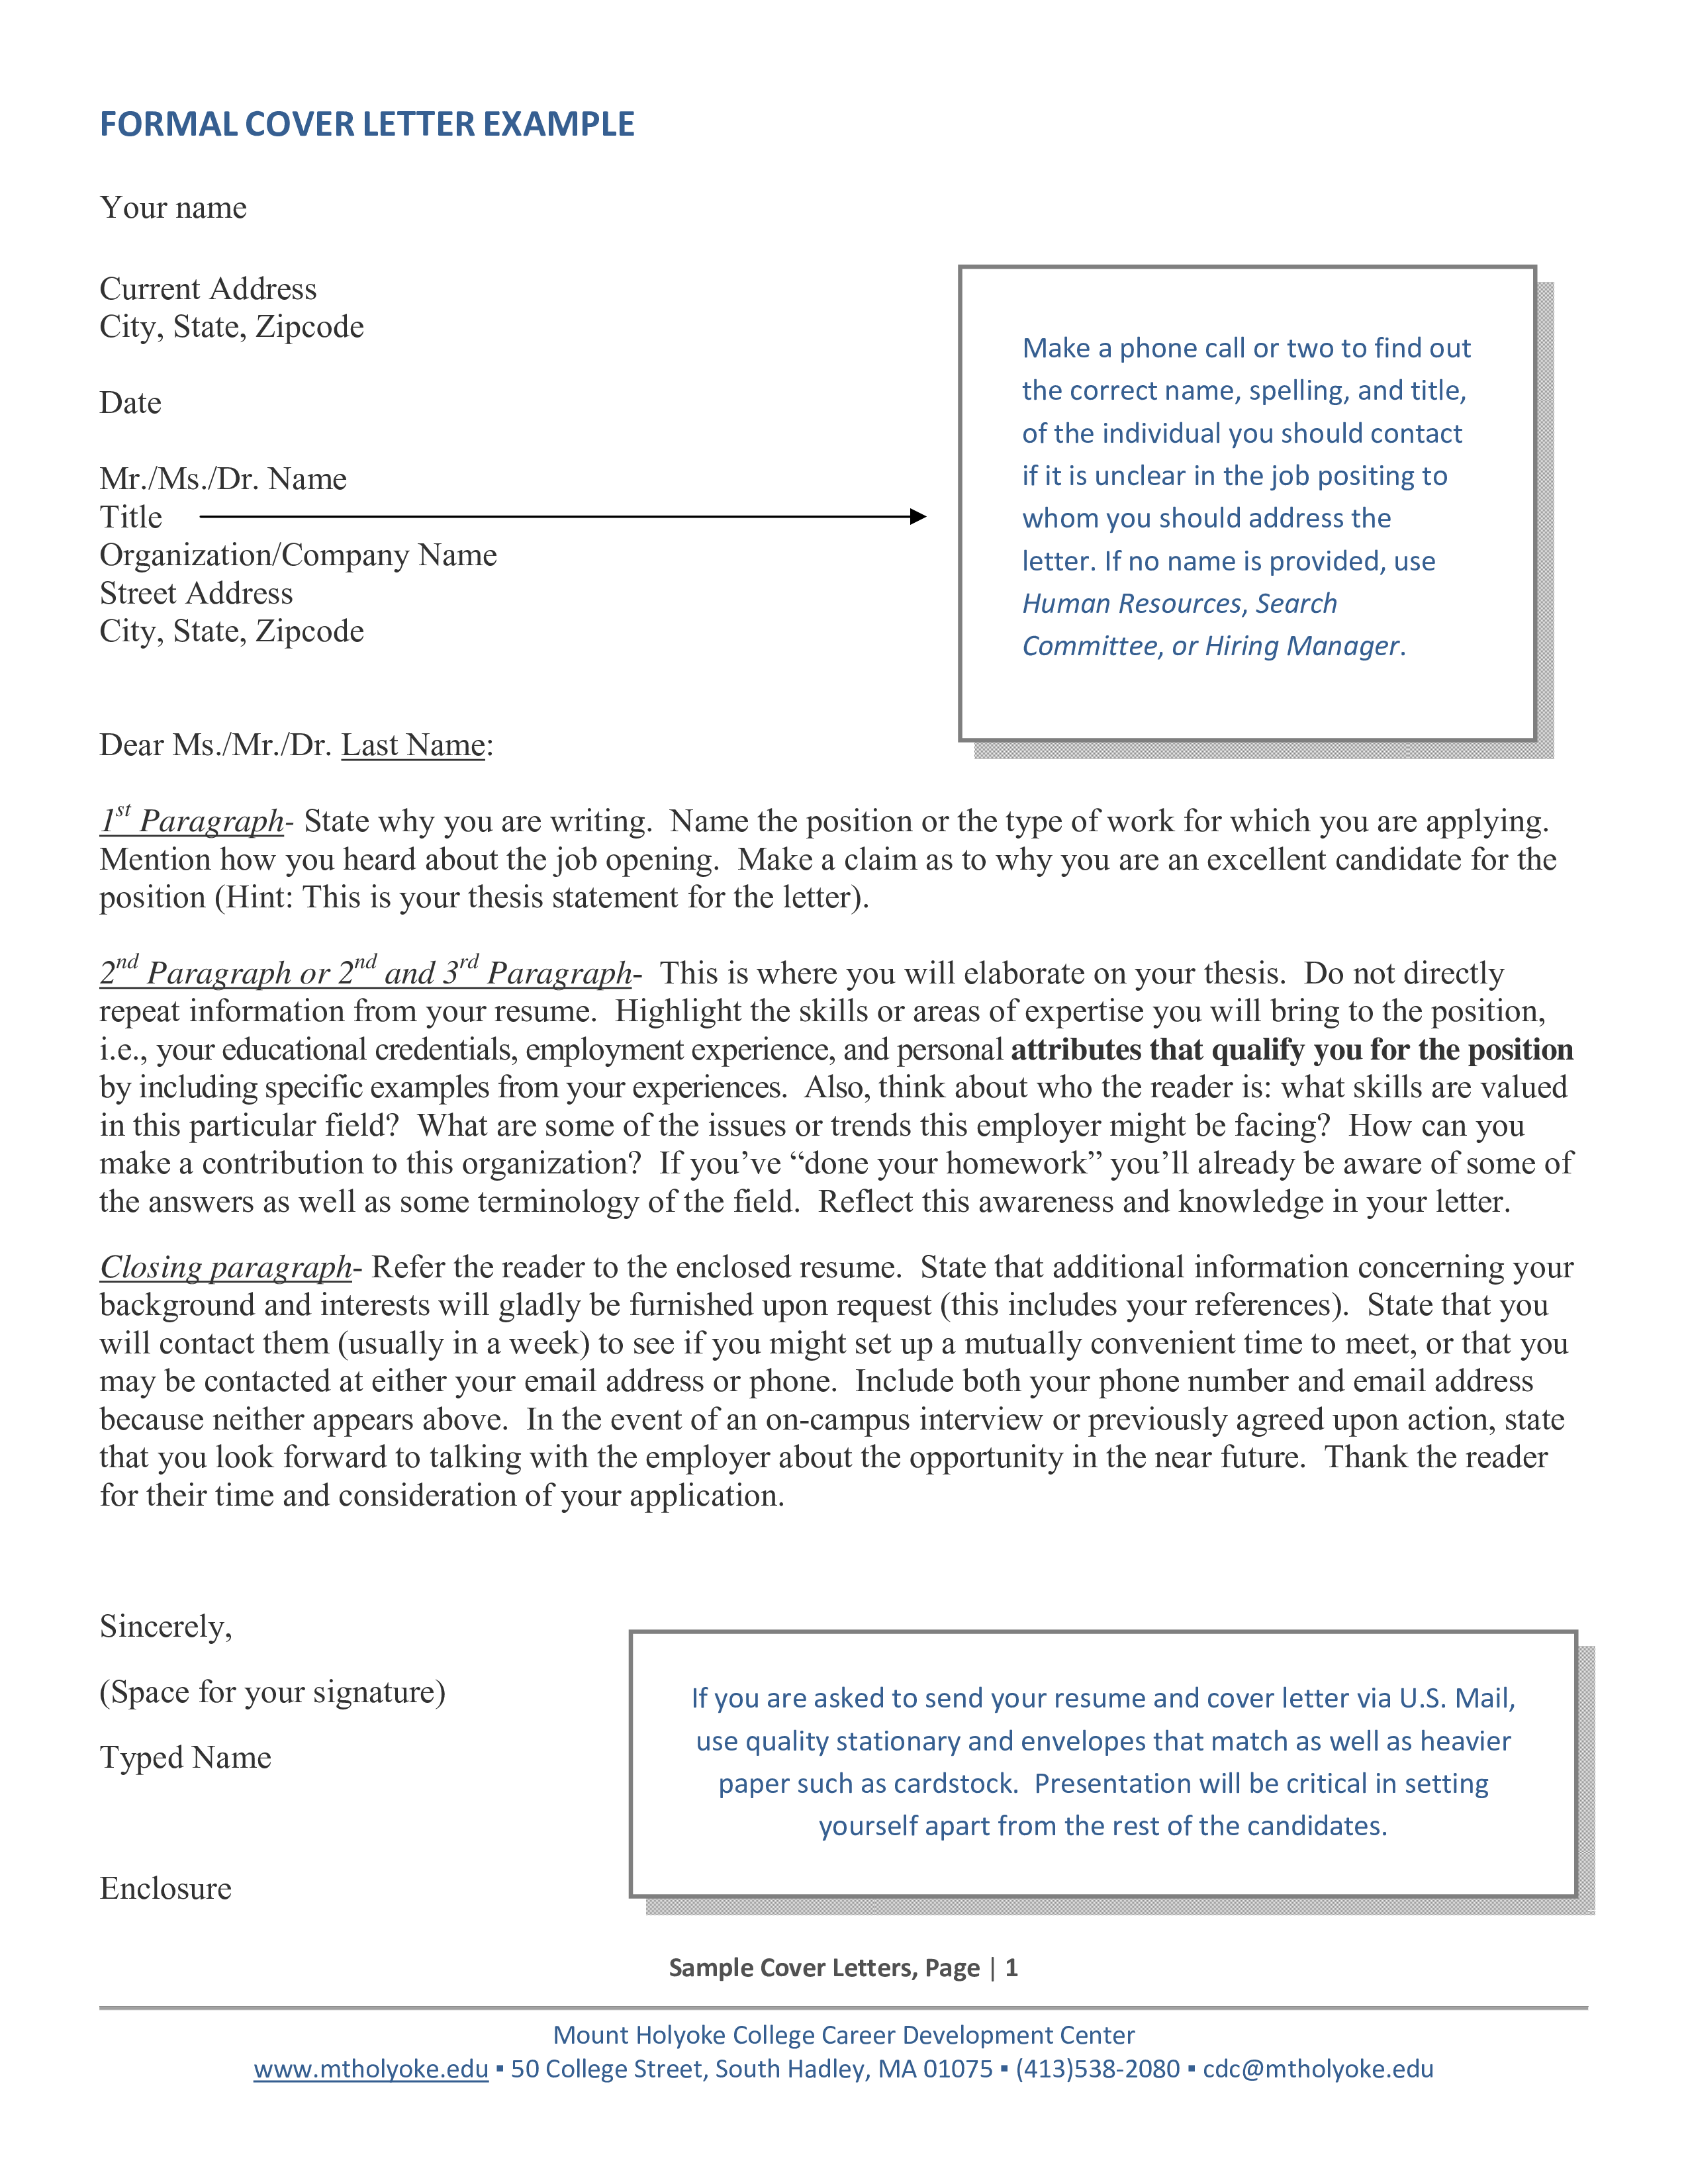 Sample Formal Cover Letter Templates at